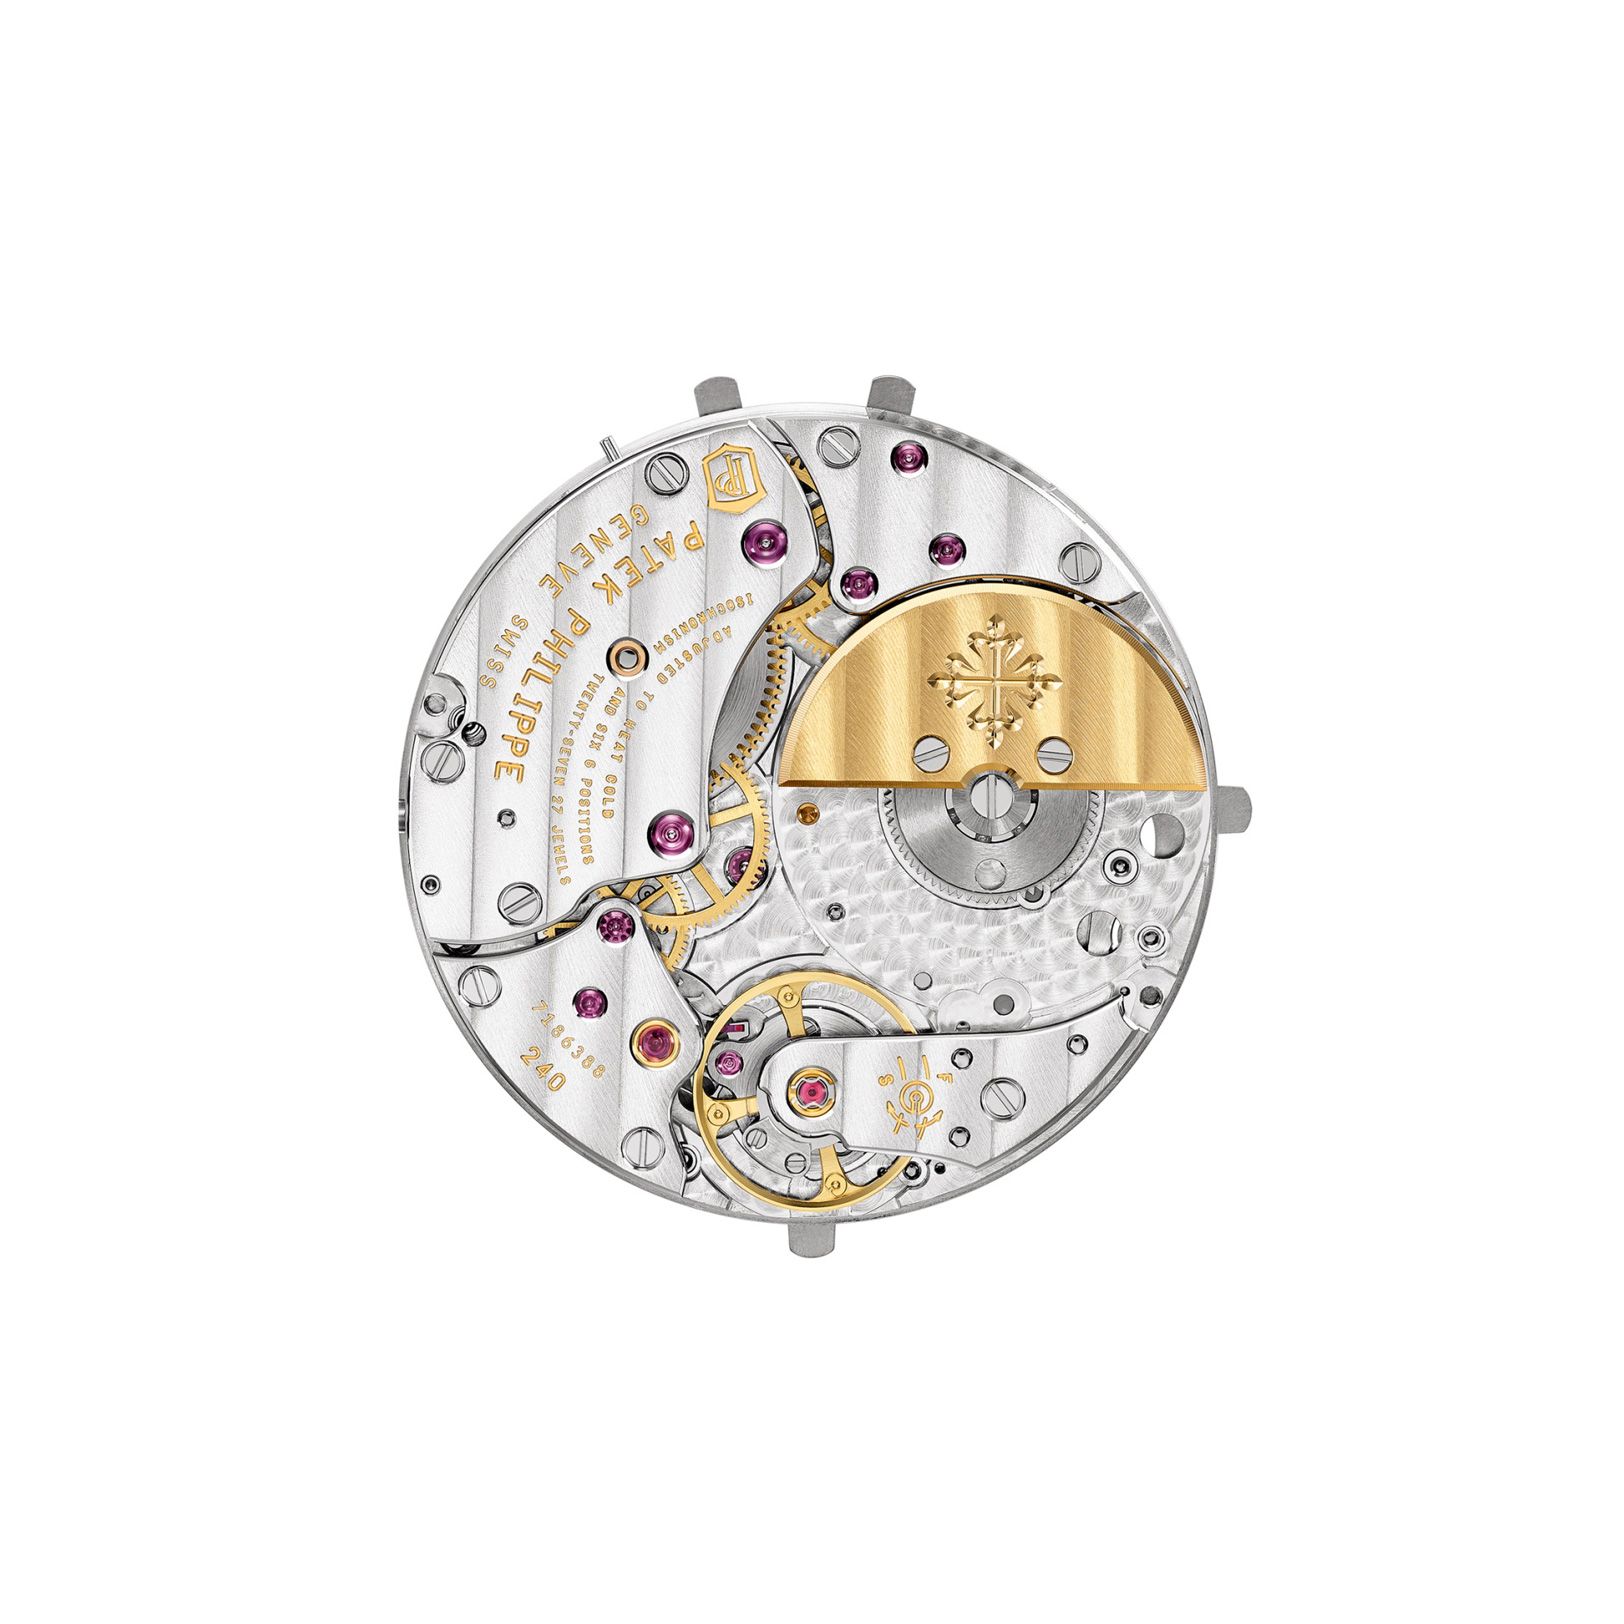 Grand Complications White Gold Ladies First Perpetual Calendar gallery 4